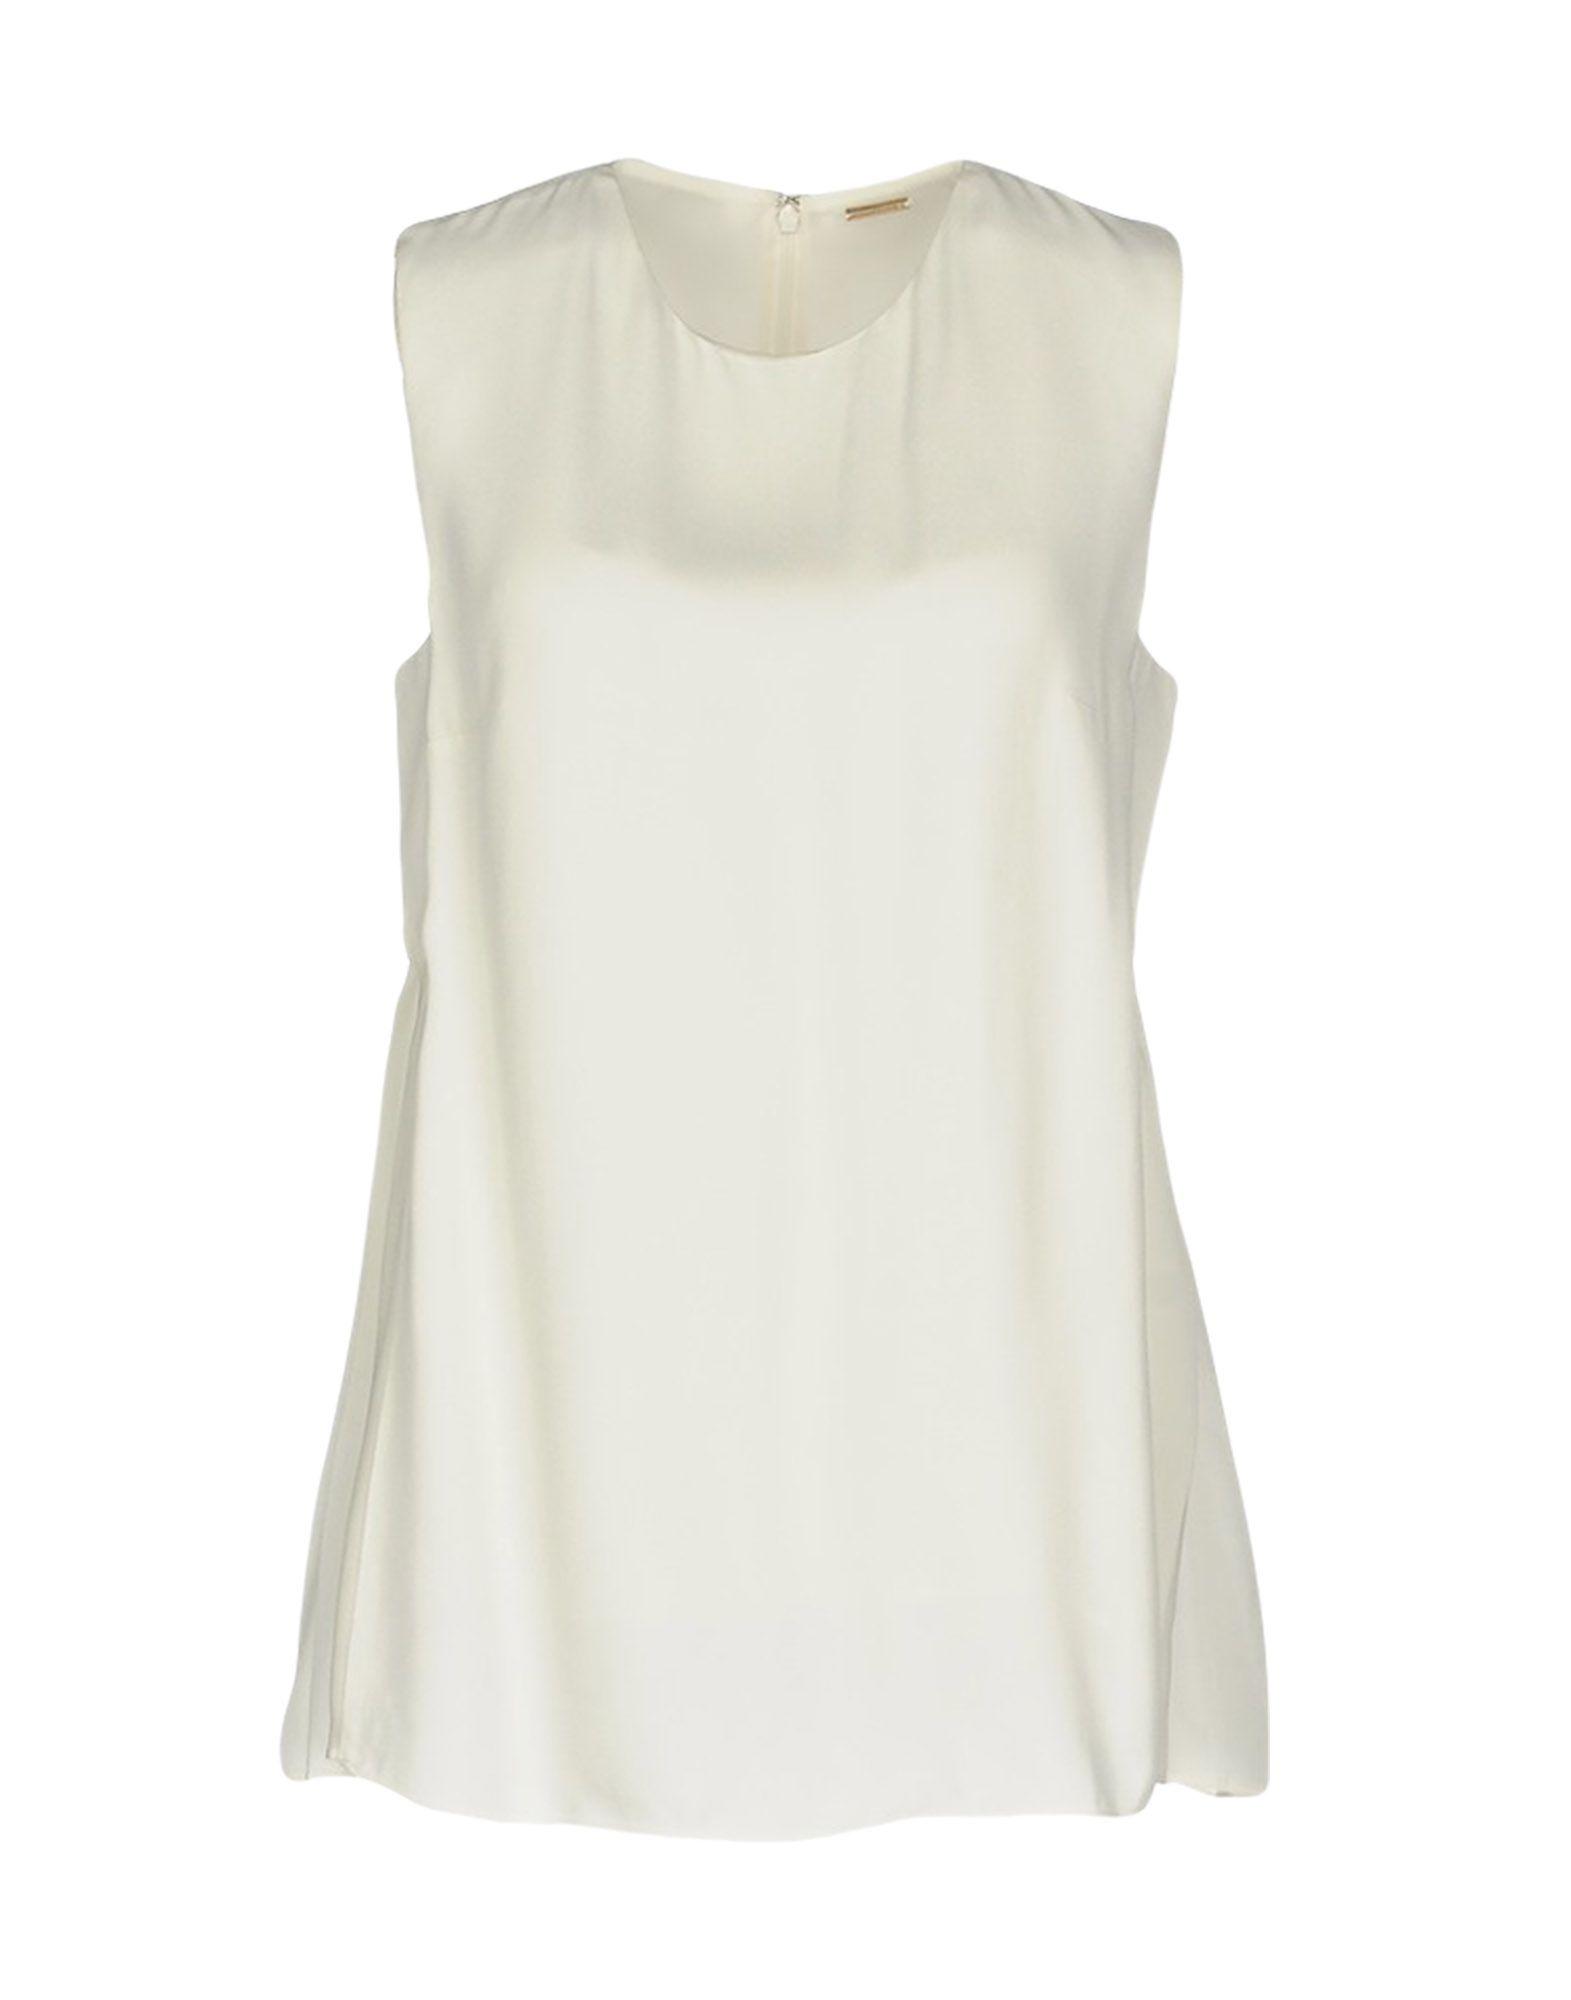 Adam Lippes Top In Ivory | ModeSens